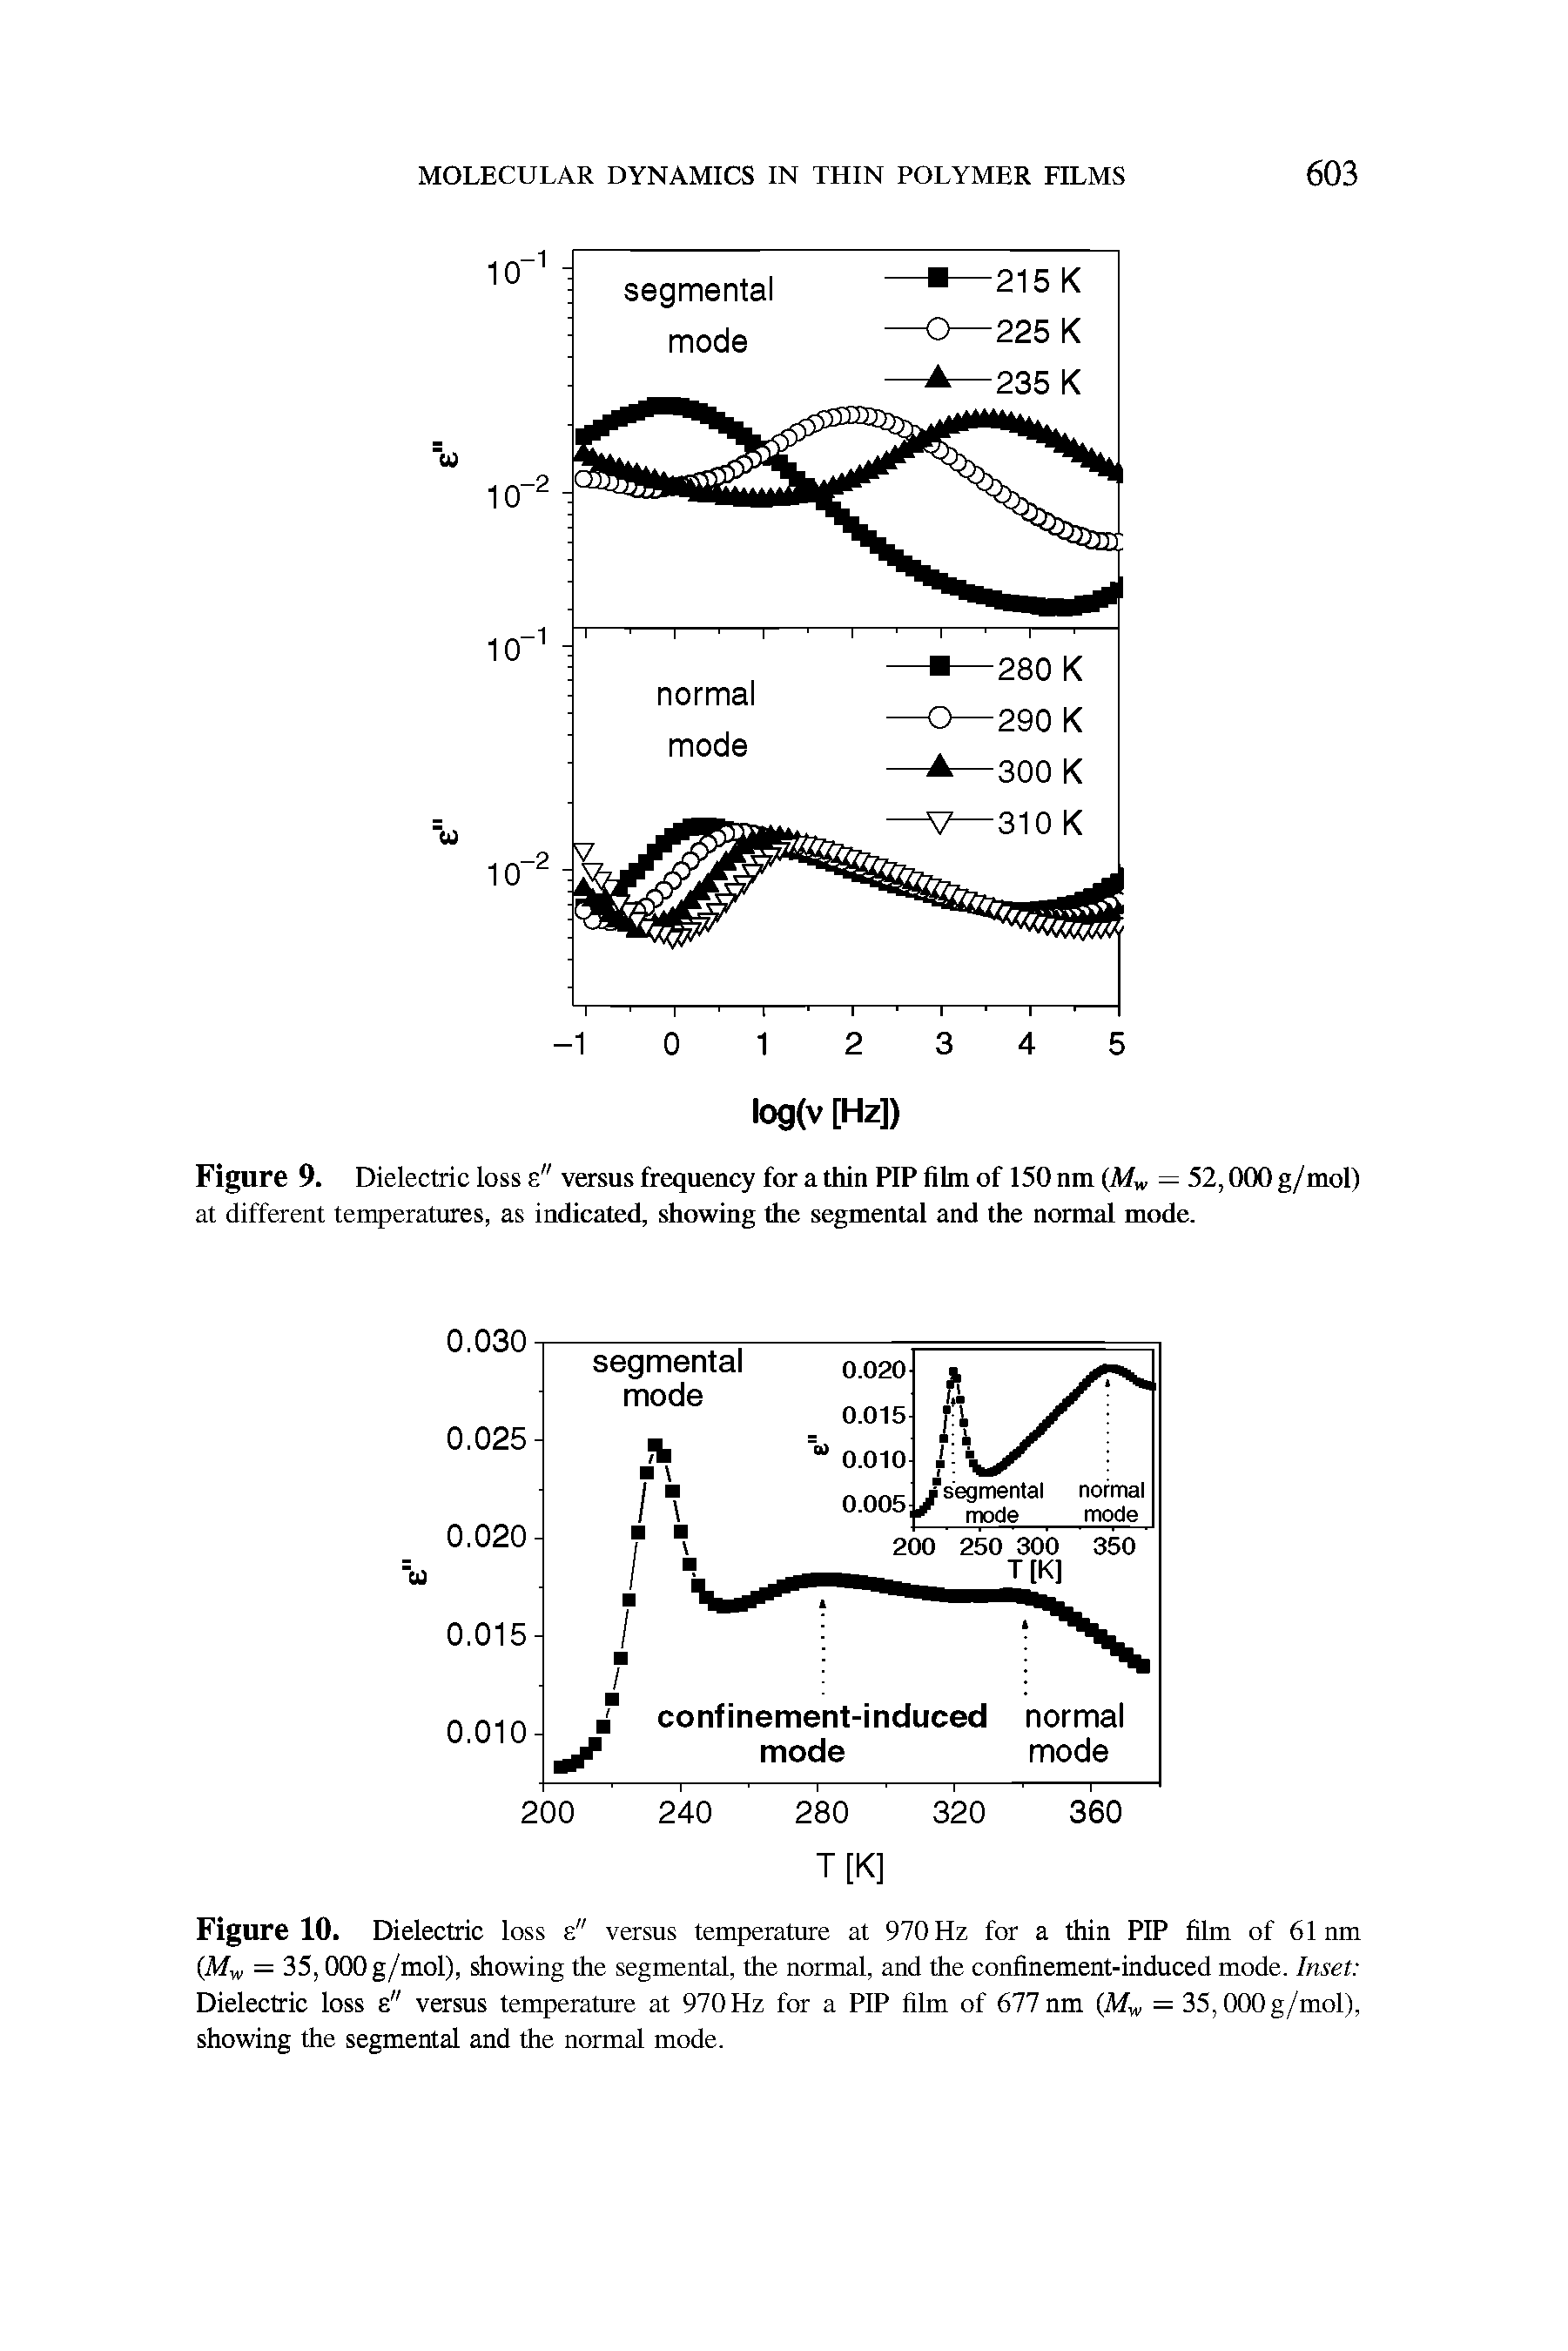 Figure 10. Dielectric loss s" versus temperature at 970 Hz for a thin PIP film of 61 nm (Mw = 35,000 g/mol), showing the segmental, the normal, and the confinement-induced mode. Inset Dielectric loss e" versus temperature at 970 Hz for a PIP film of 677 nm (Mw = 35,000 g/mol), showing the segmental and the normal mode.